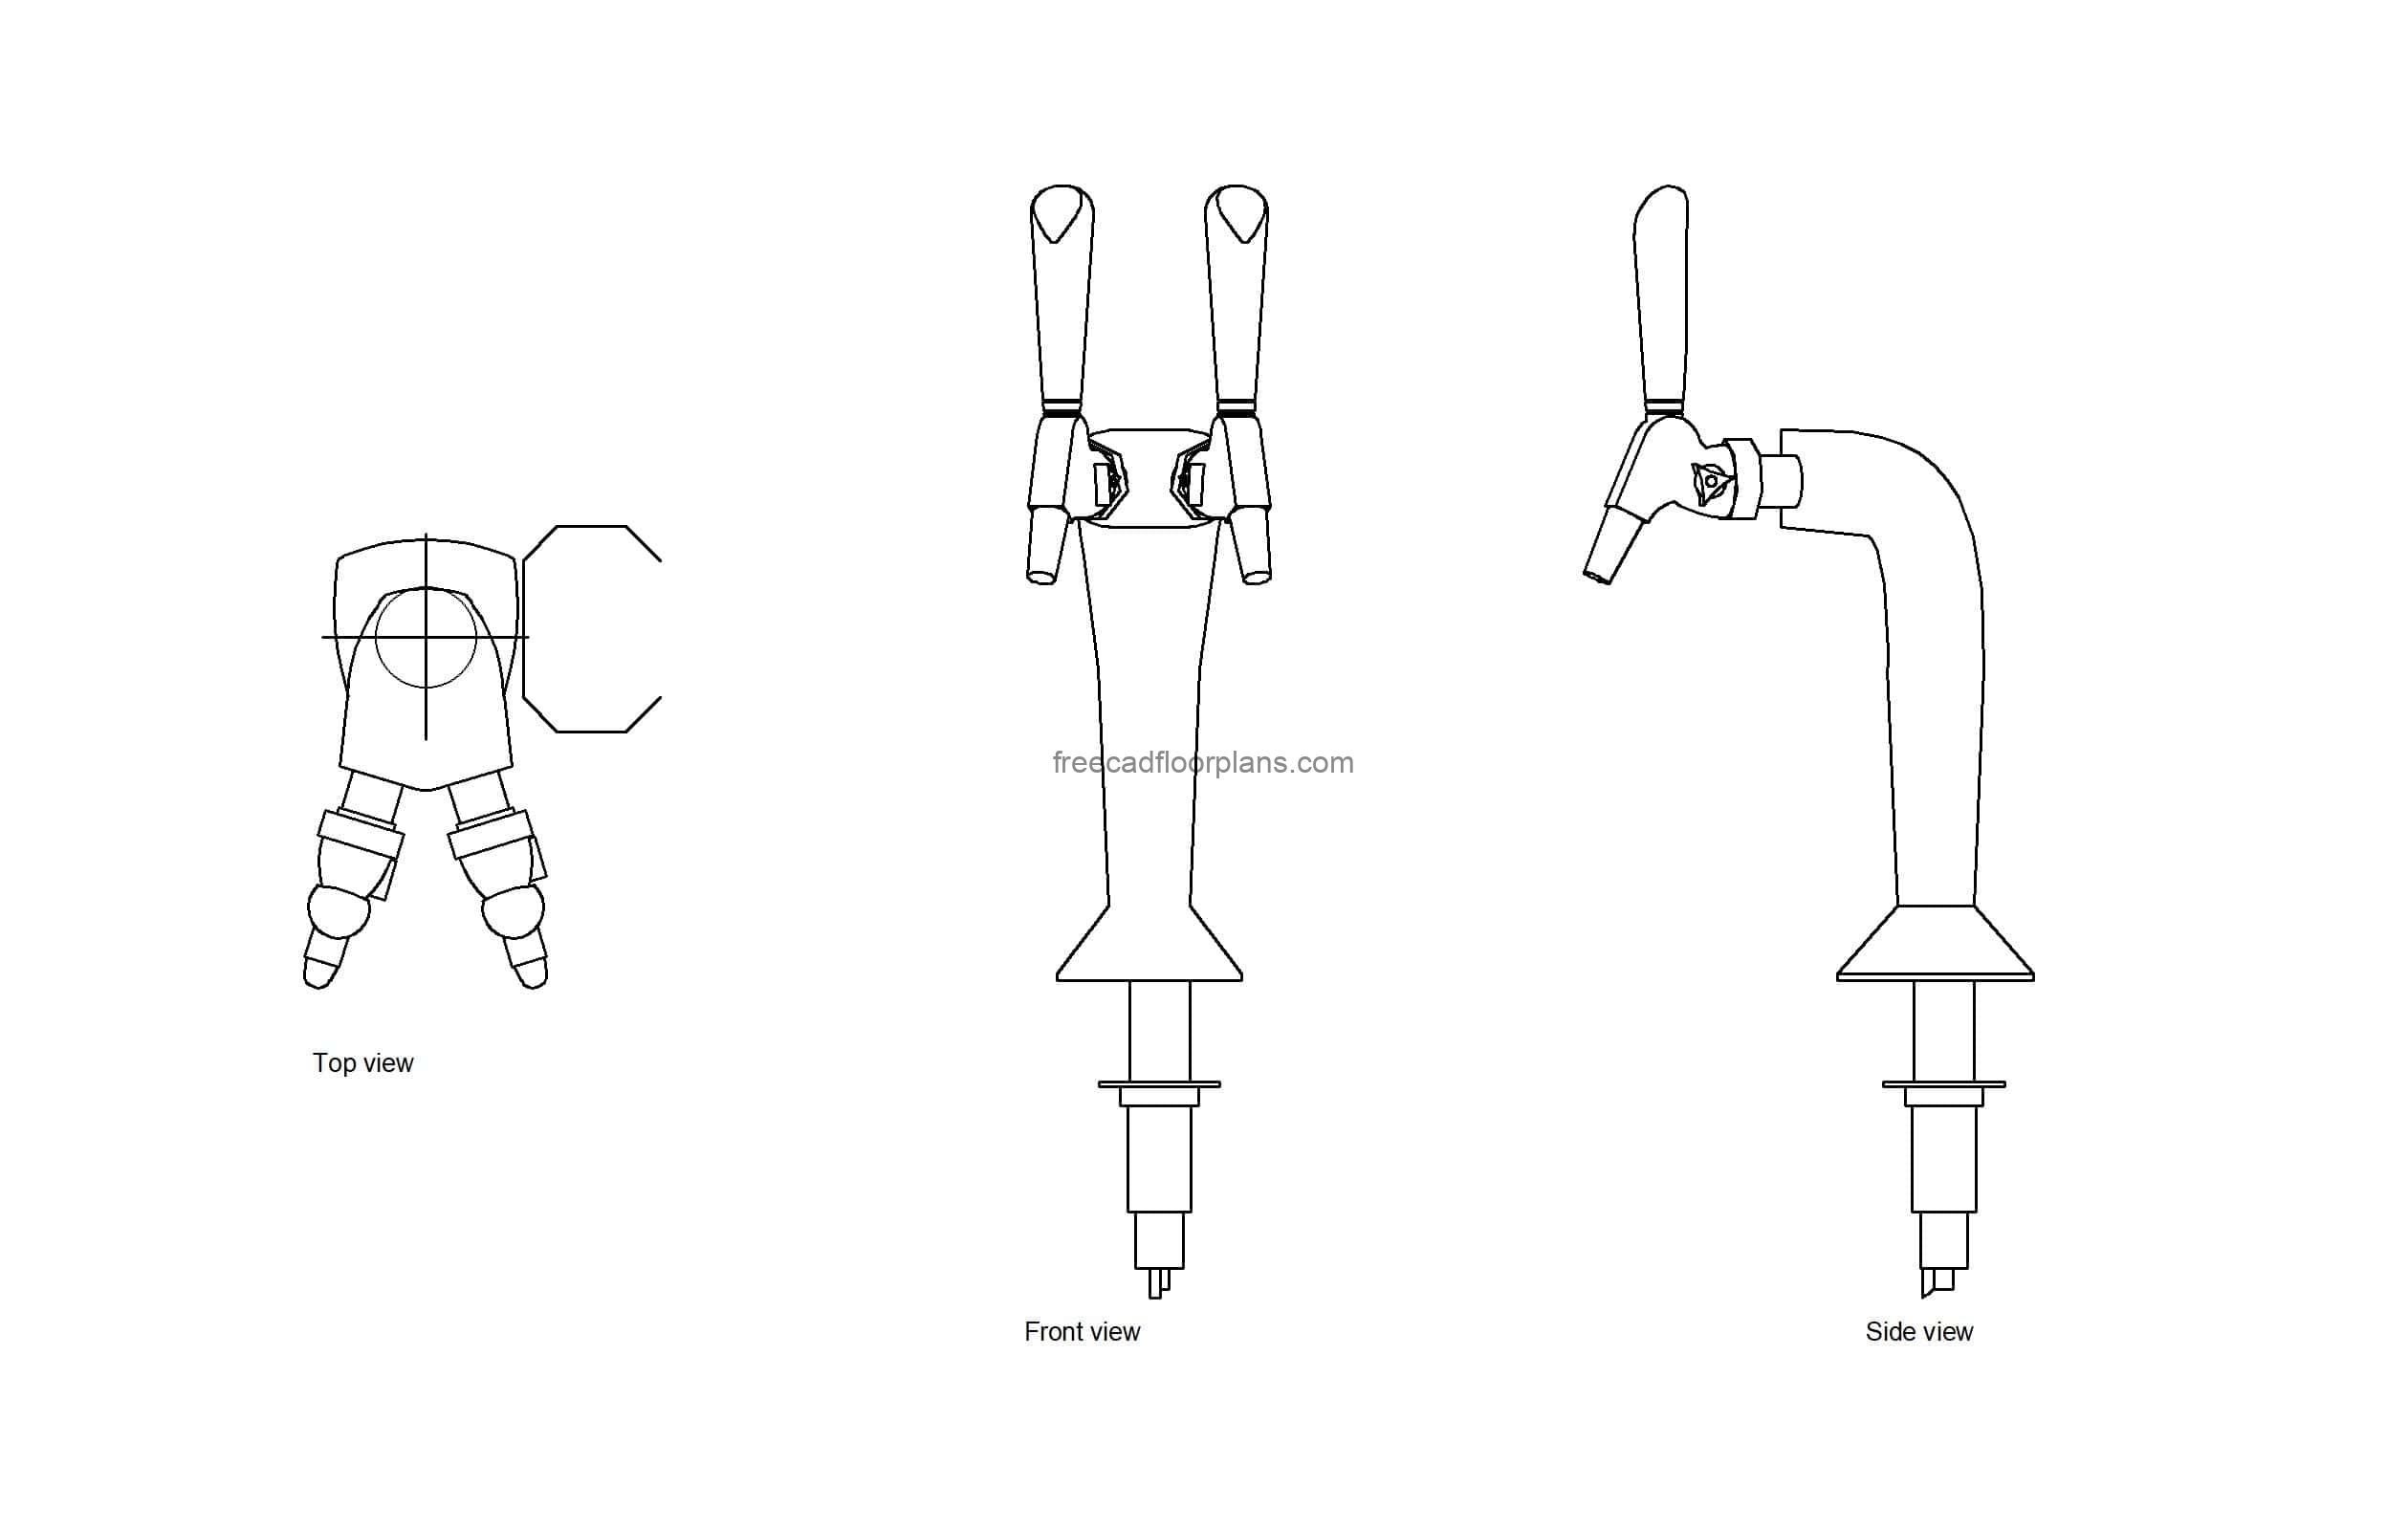 autocad drawing of a Two Tower Faucet CBR-V2C-MINI, plan and elevation 2d views, dwg file free for download